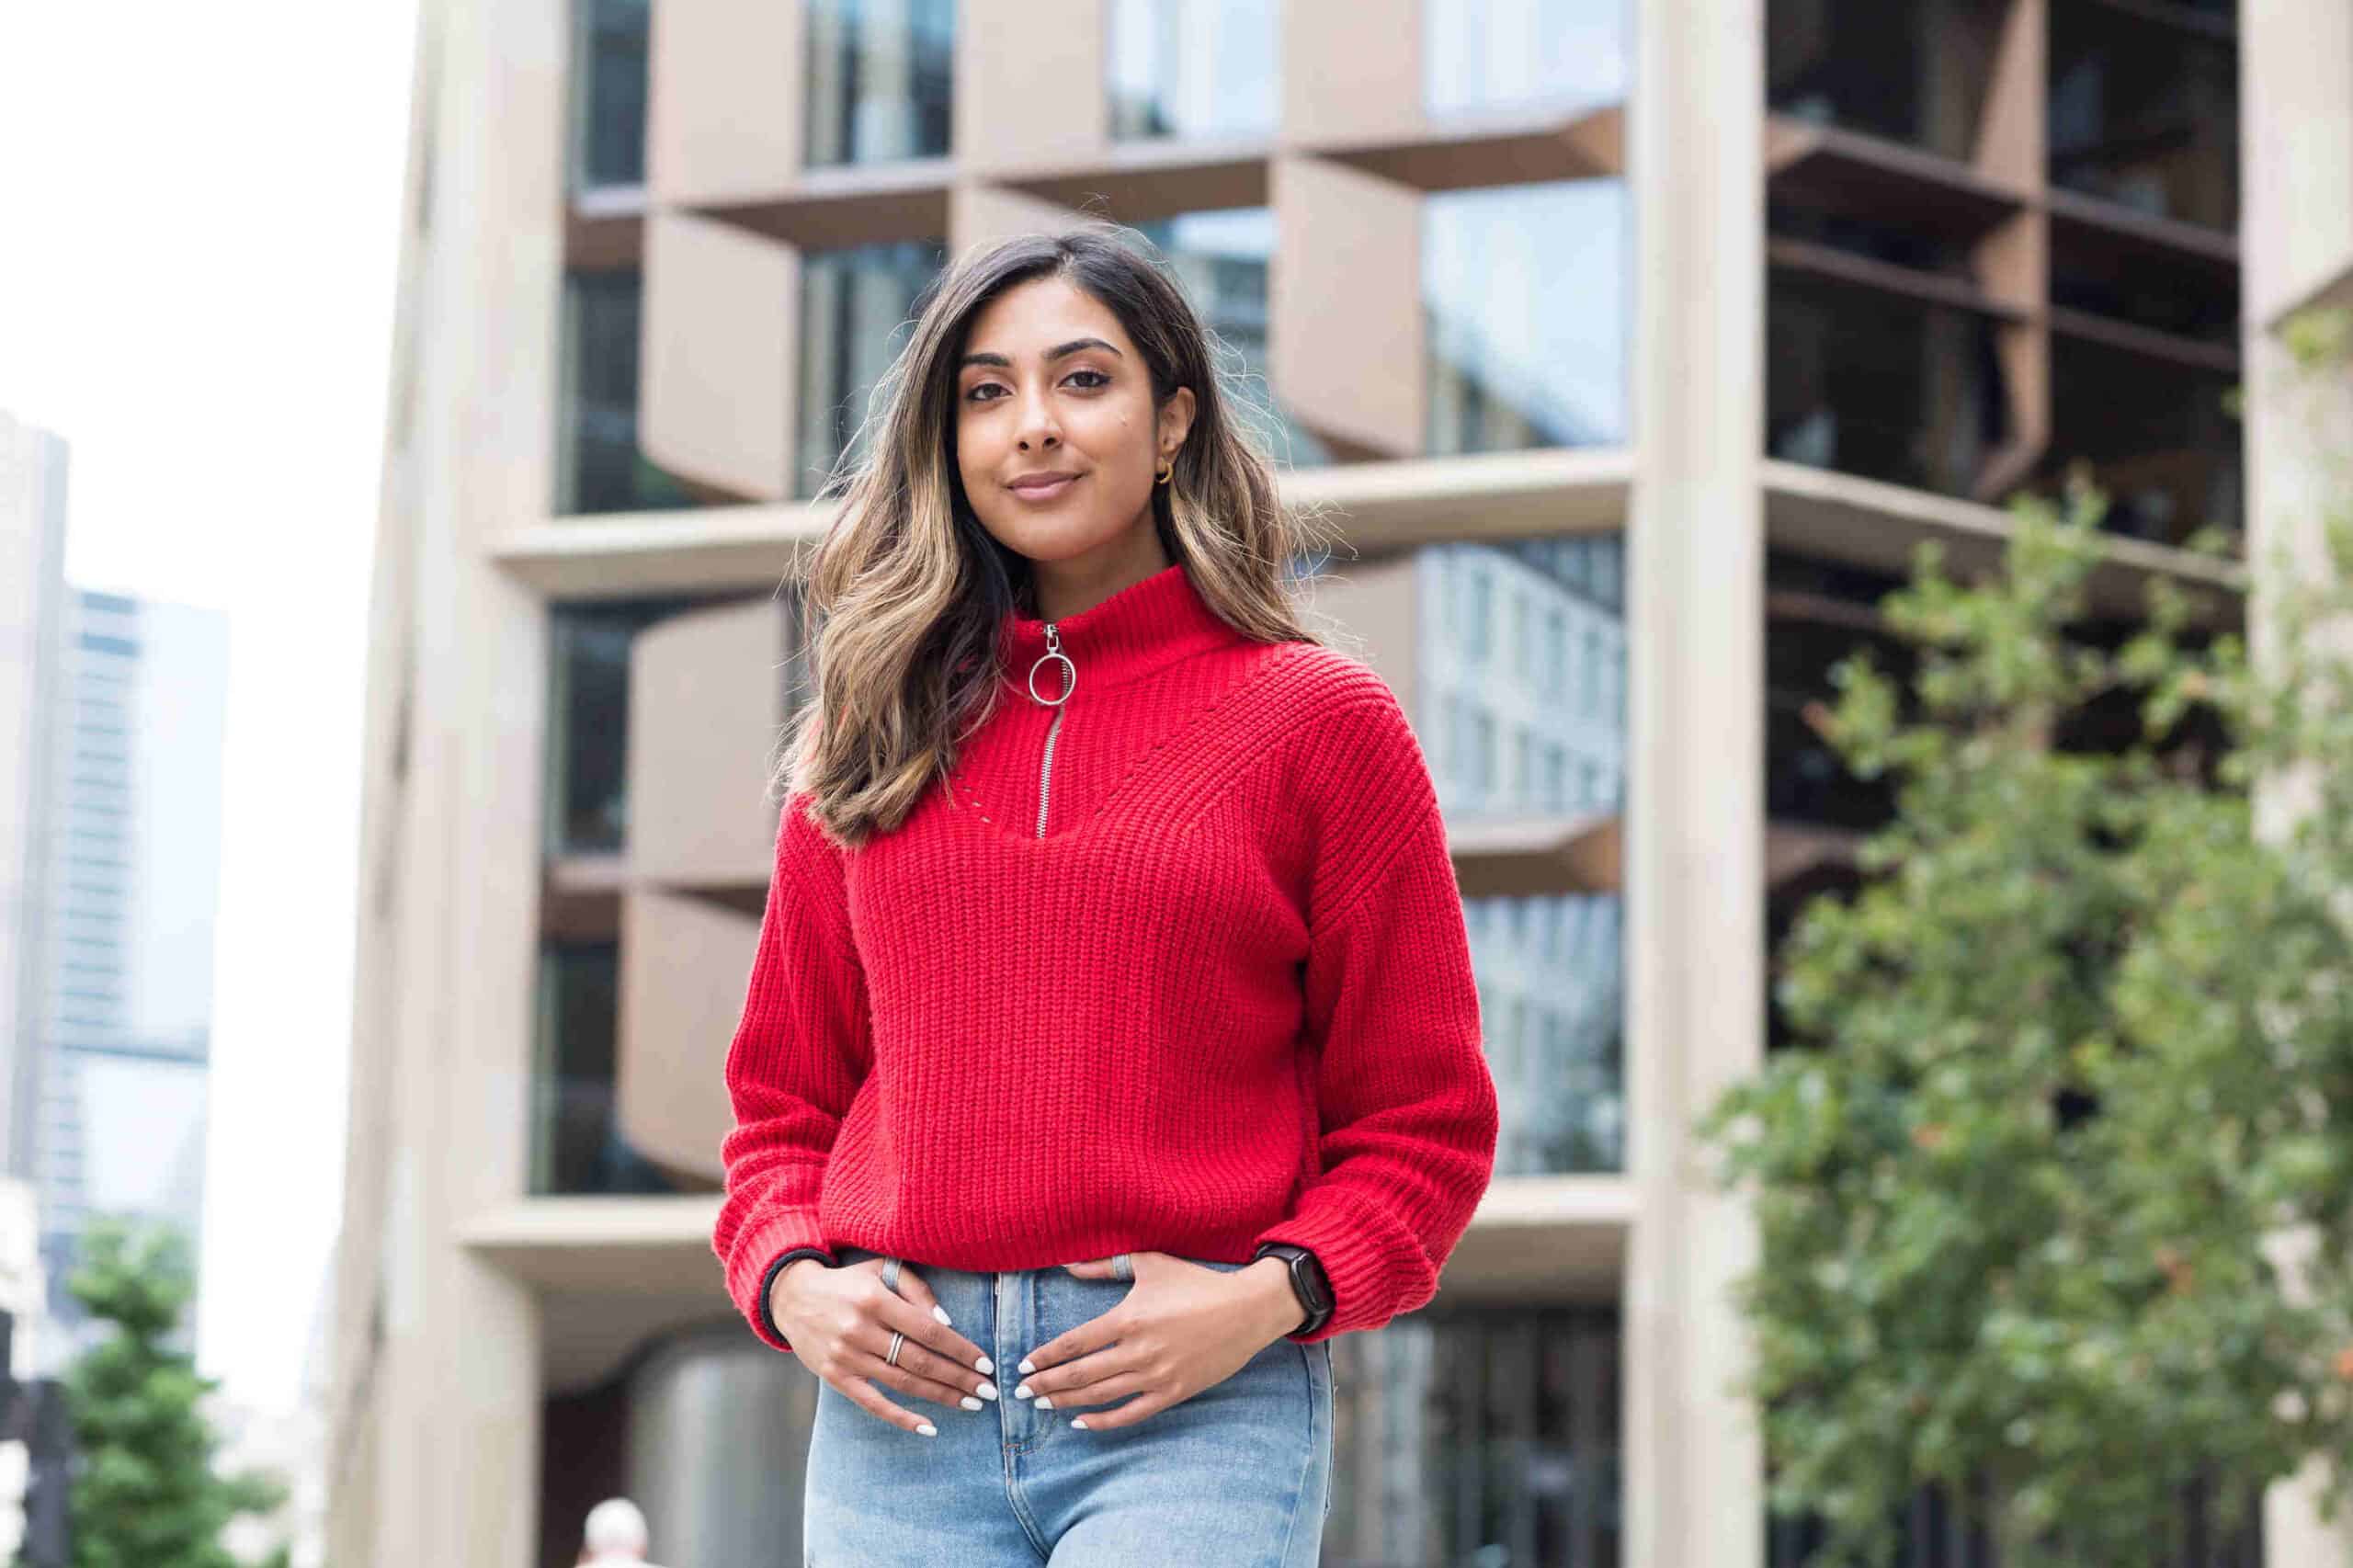 Kiran has brown hair and is stood in front of a tall building. She wears light blue jeans a red quarter-zip jumper and has her hands in her pockets.